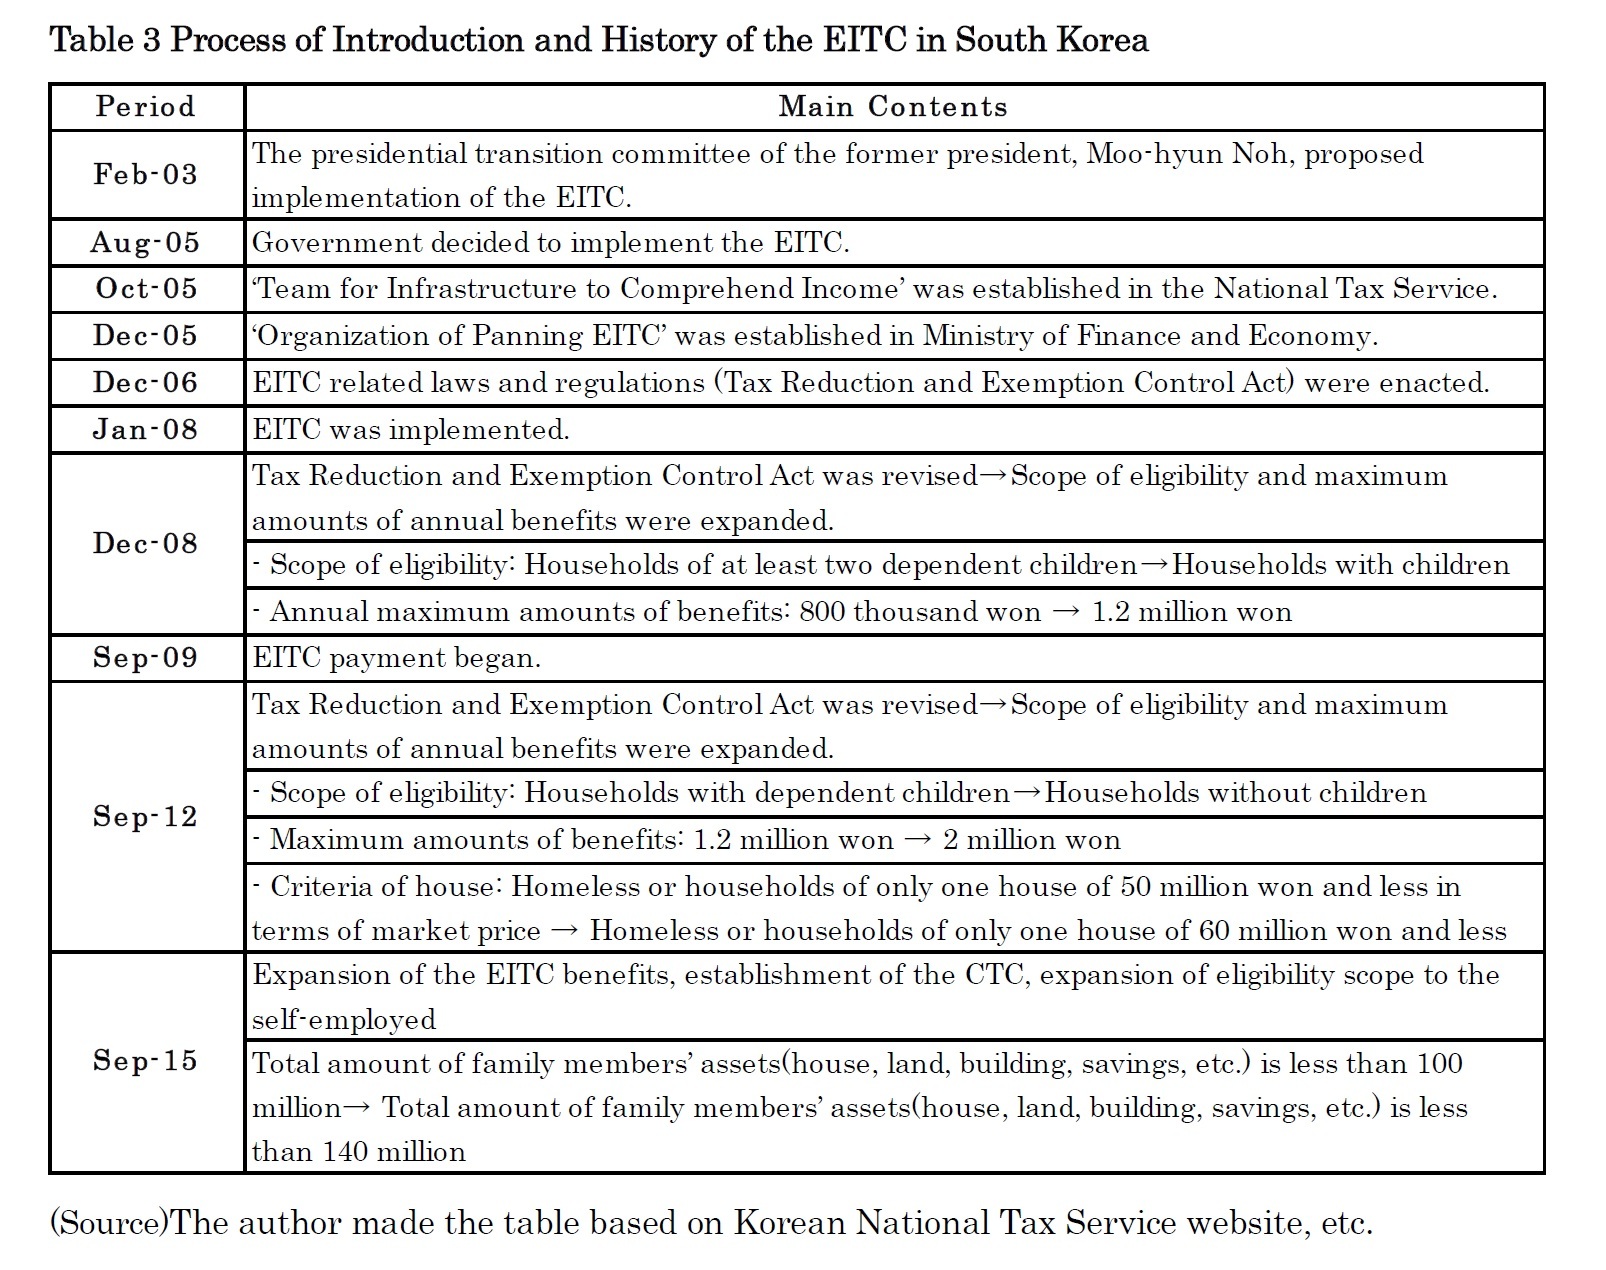 Table 3 Process of Introduction and History of the EITC in South Korea